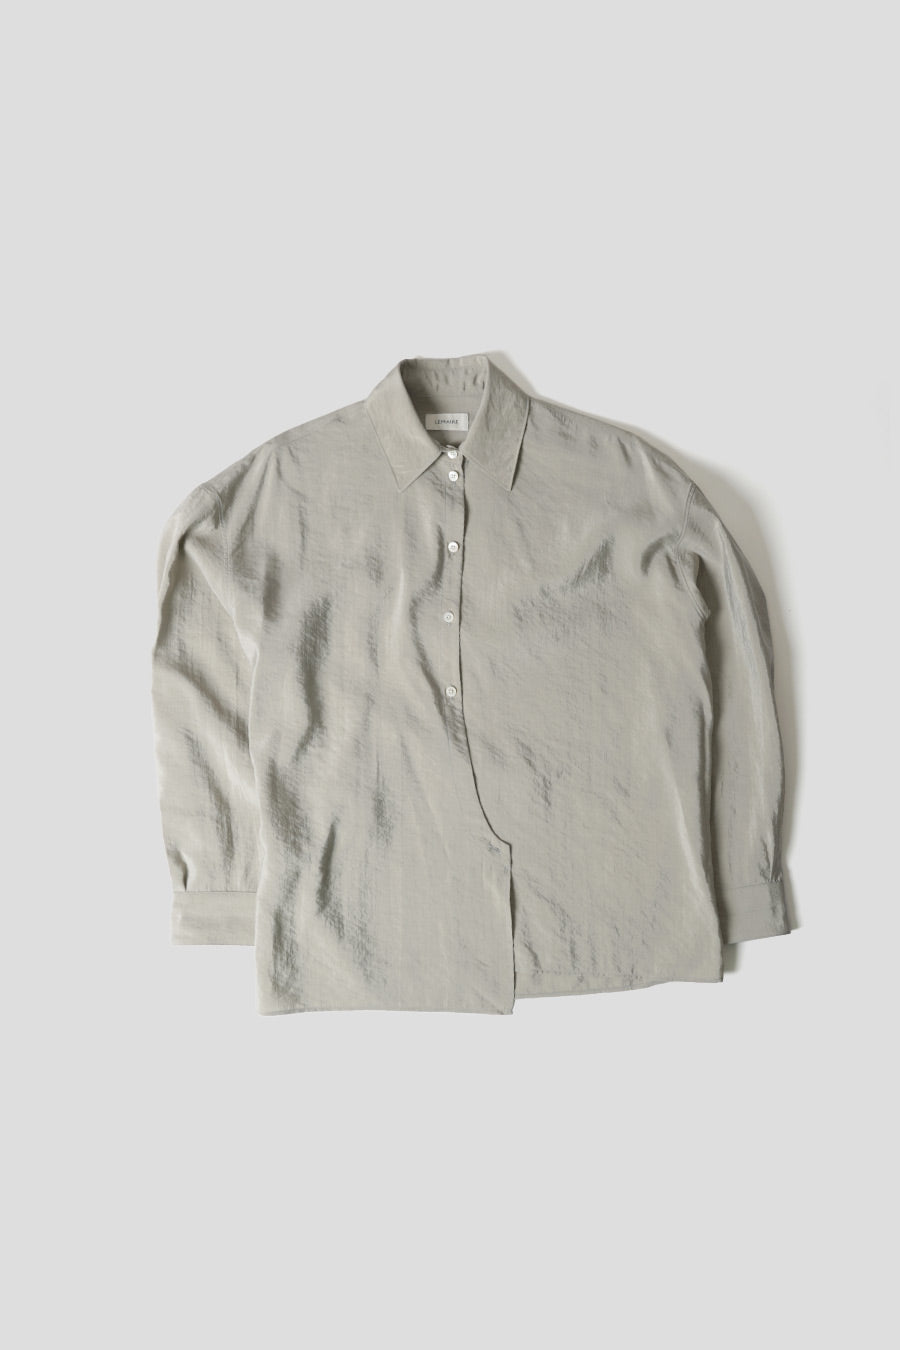 LEMAIRE - TWISTED GREY SHIRT - LE LABO STORE